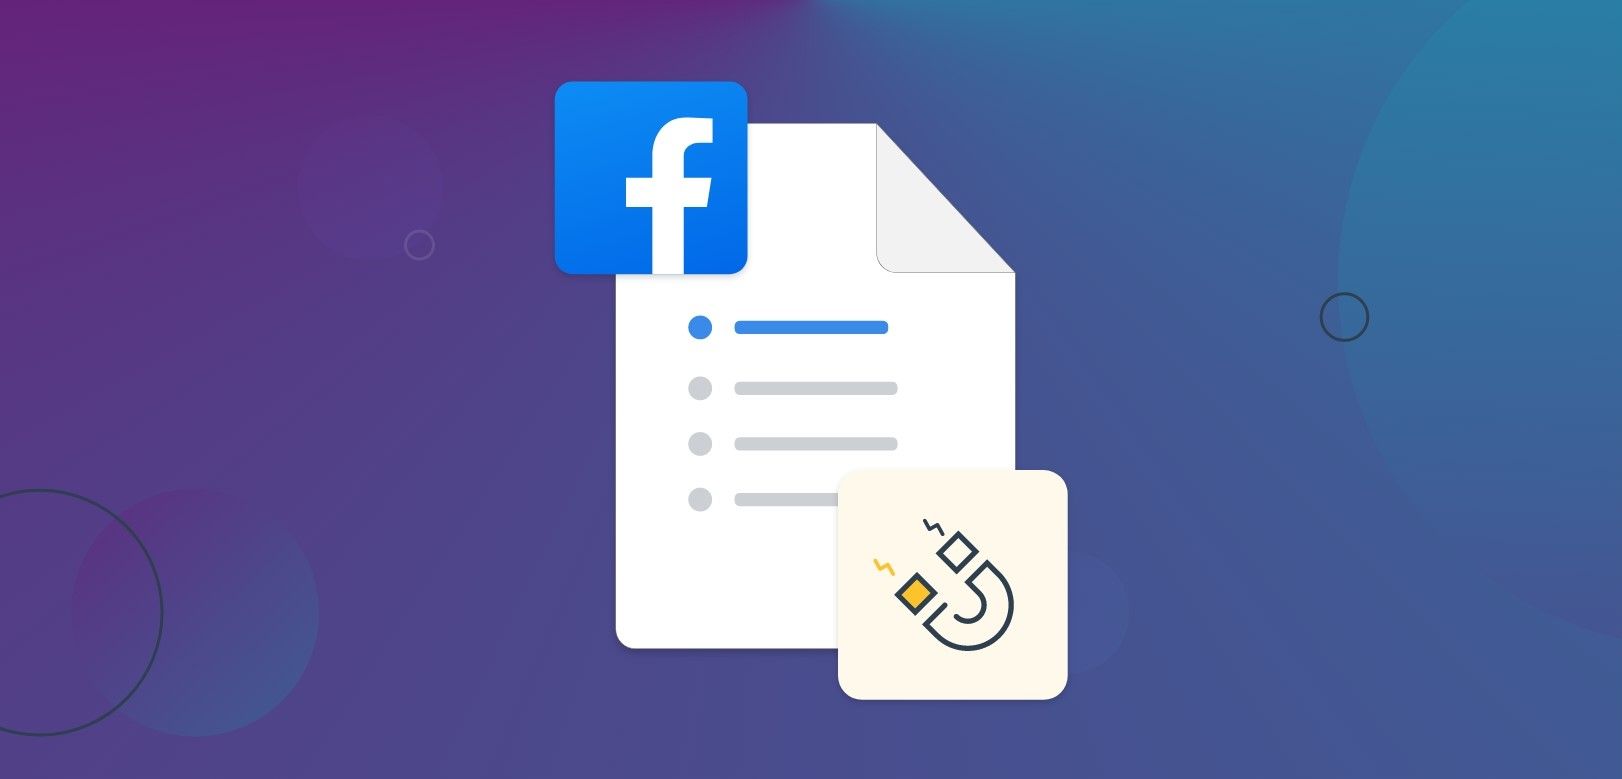 How to import Facebook ad leads into CRM?